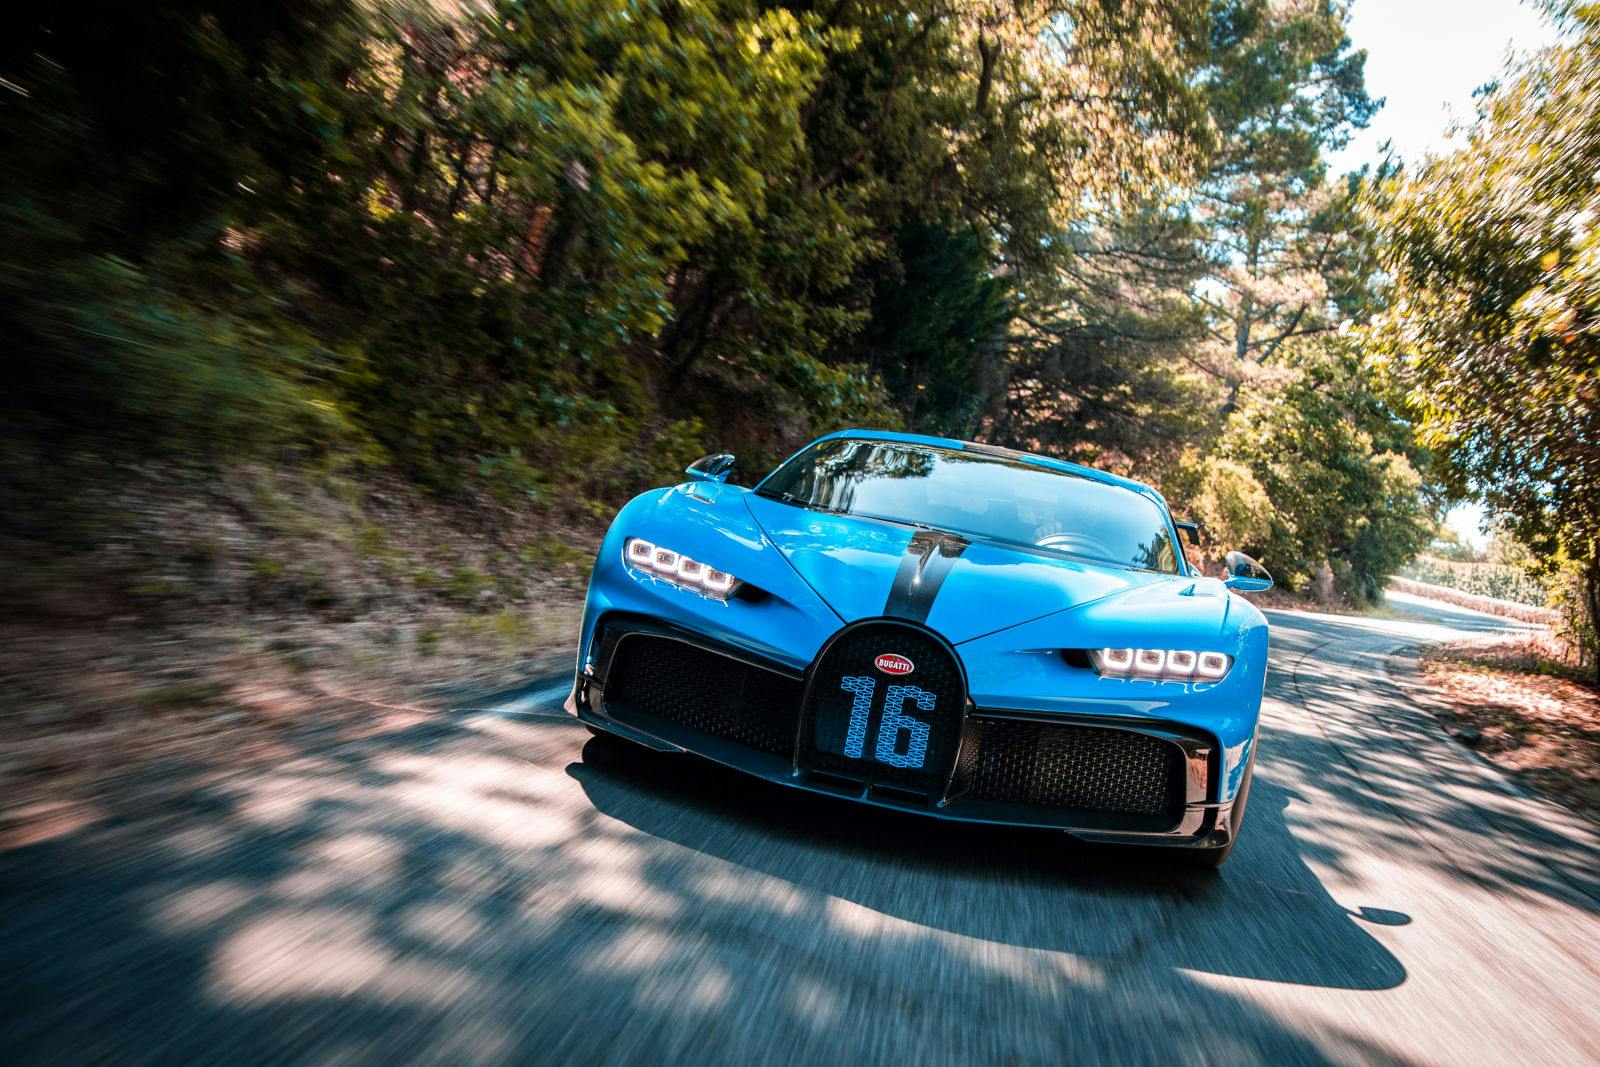 Bugatti is inviting guests to dynamically experience and test-drive the Chiron Pur Sport and Chiron Sport.